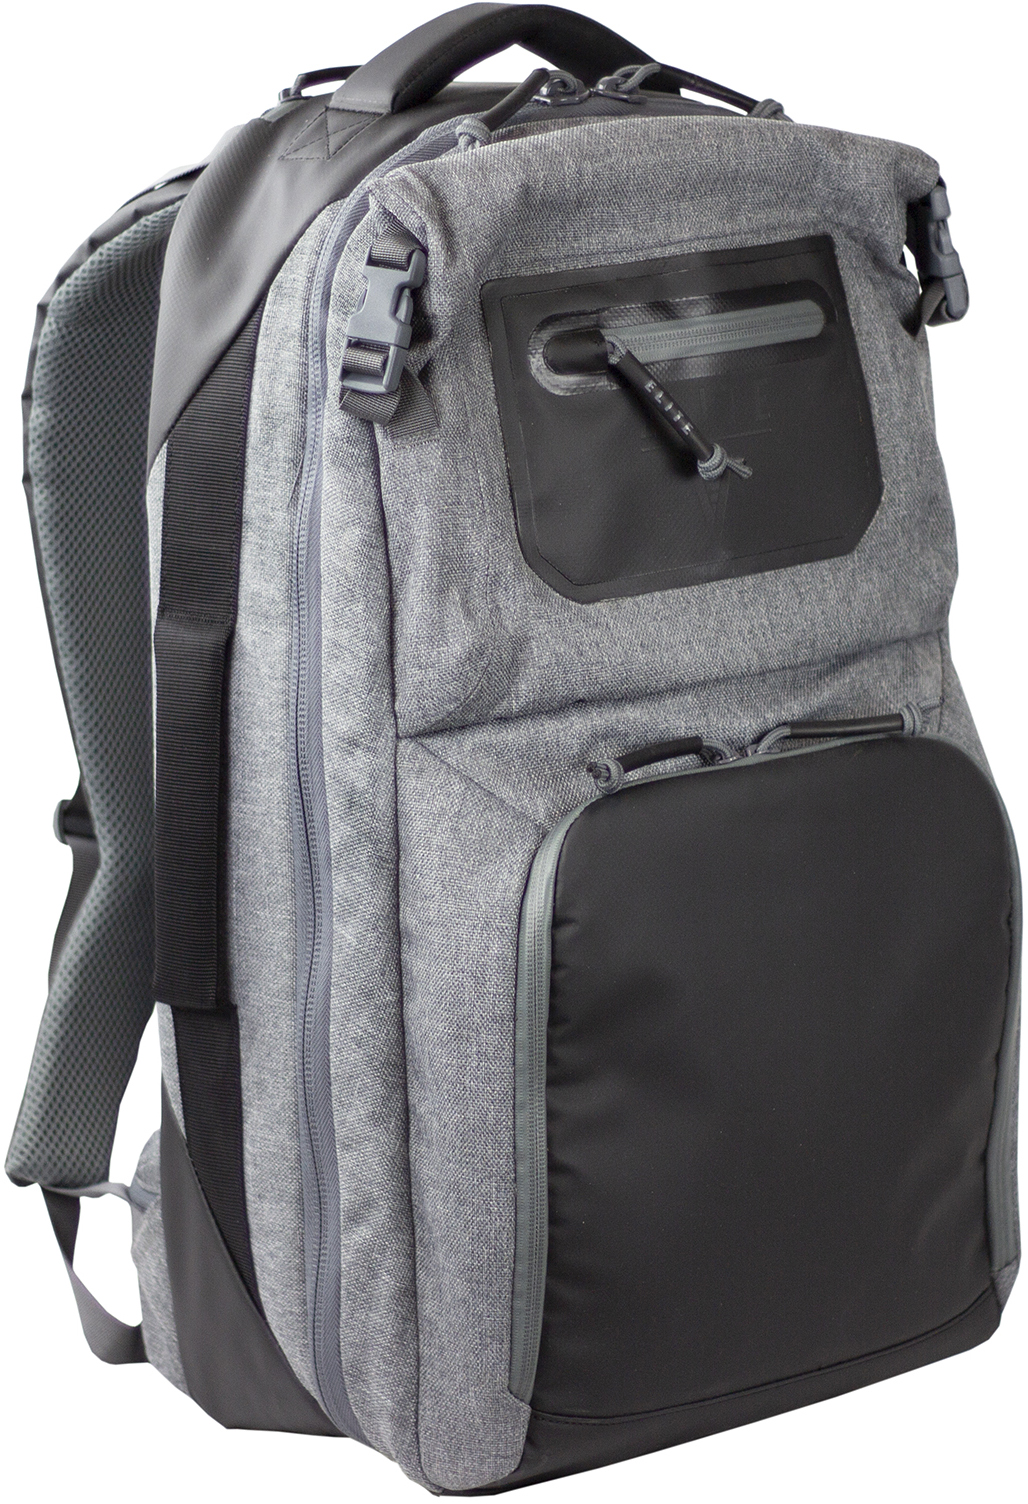 Elite Survival Systems Stealth SBR Backpack Heather Gray 7726-H